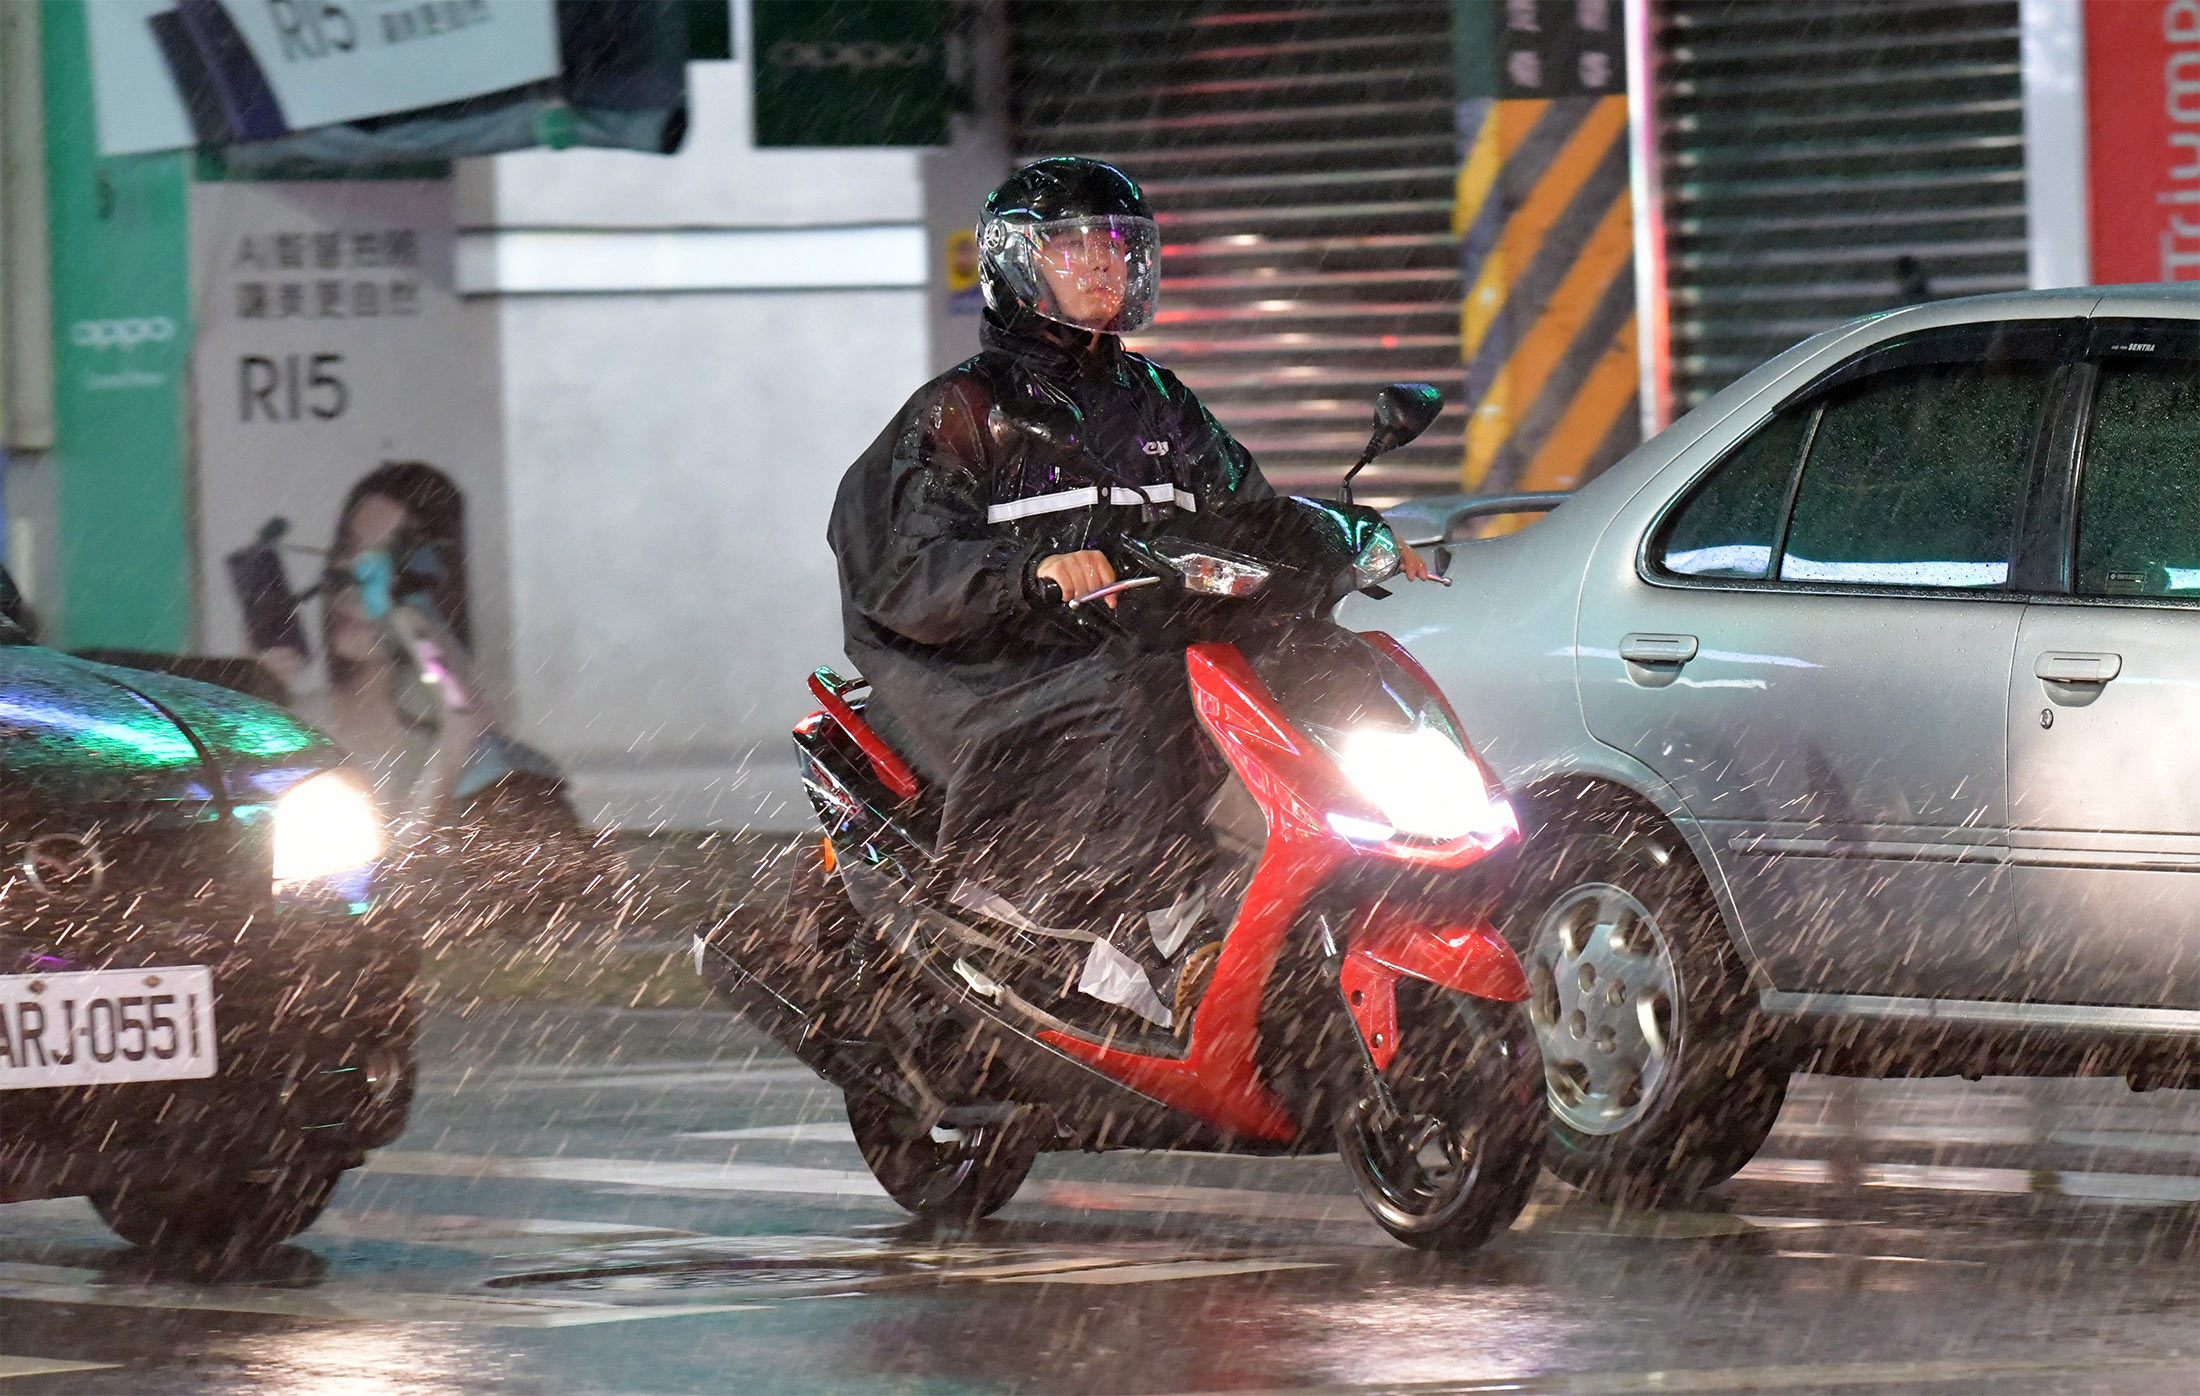 A motorcyclist rides through heavy rain in Keelung on July 10.